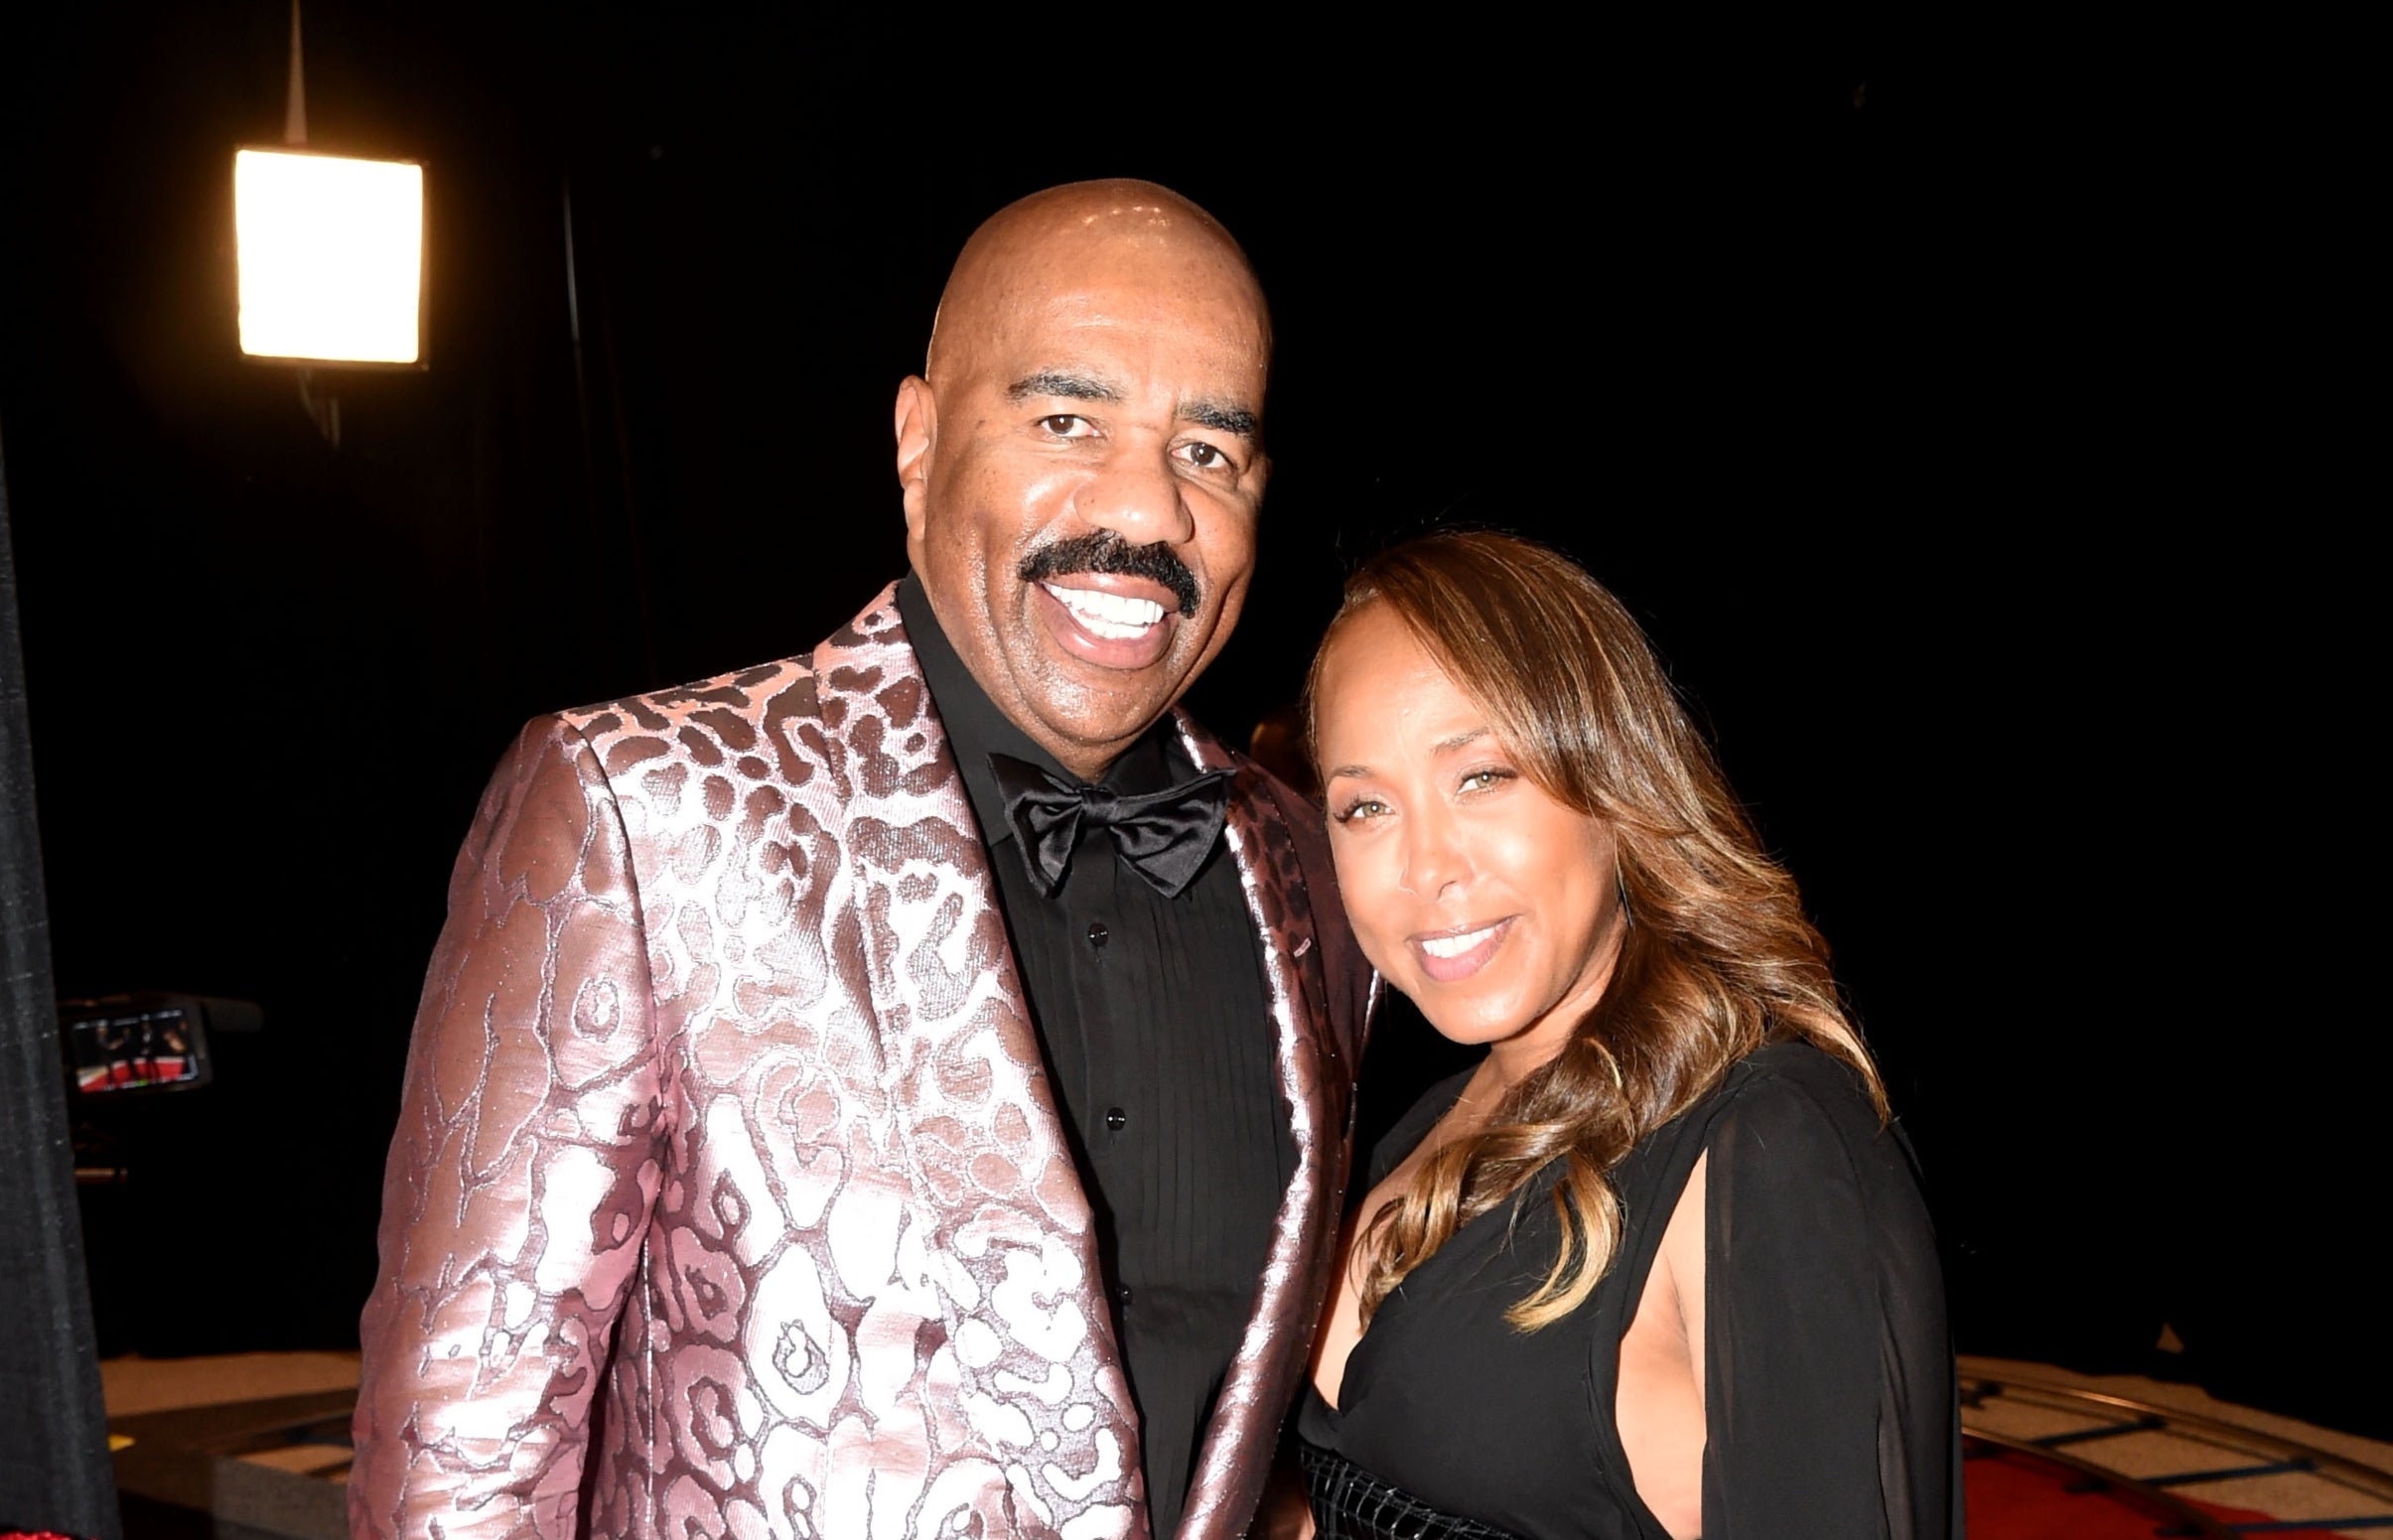 Steve And Marjorie Harvey Celebrated Their Wedding Anniversary With Trips  To Croatia And Italy